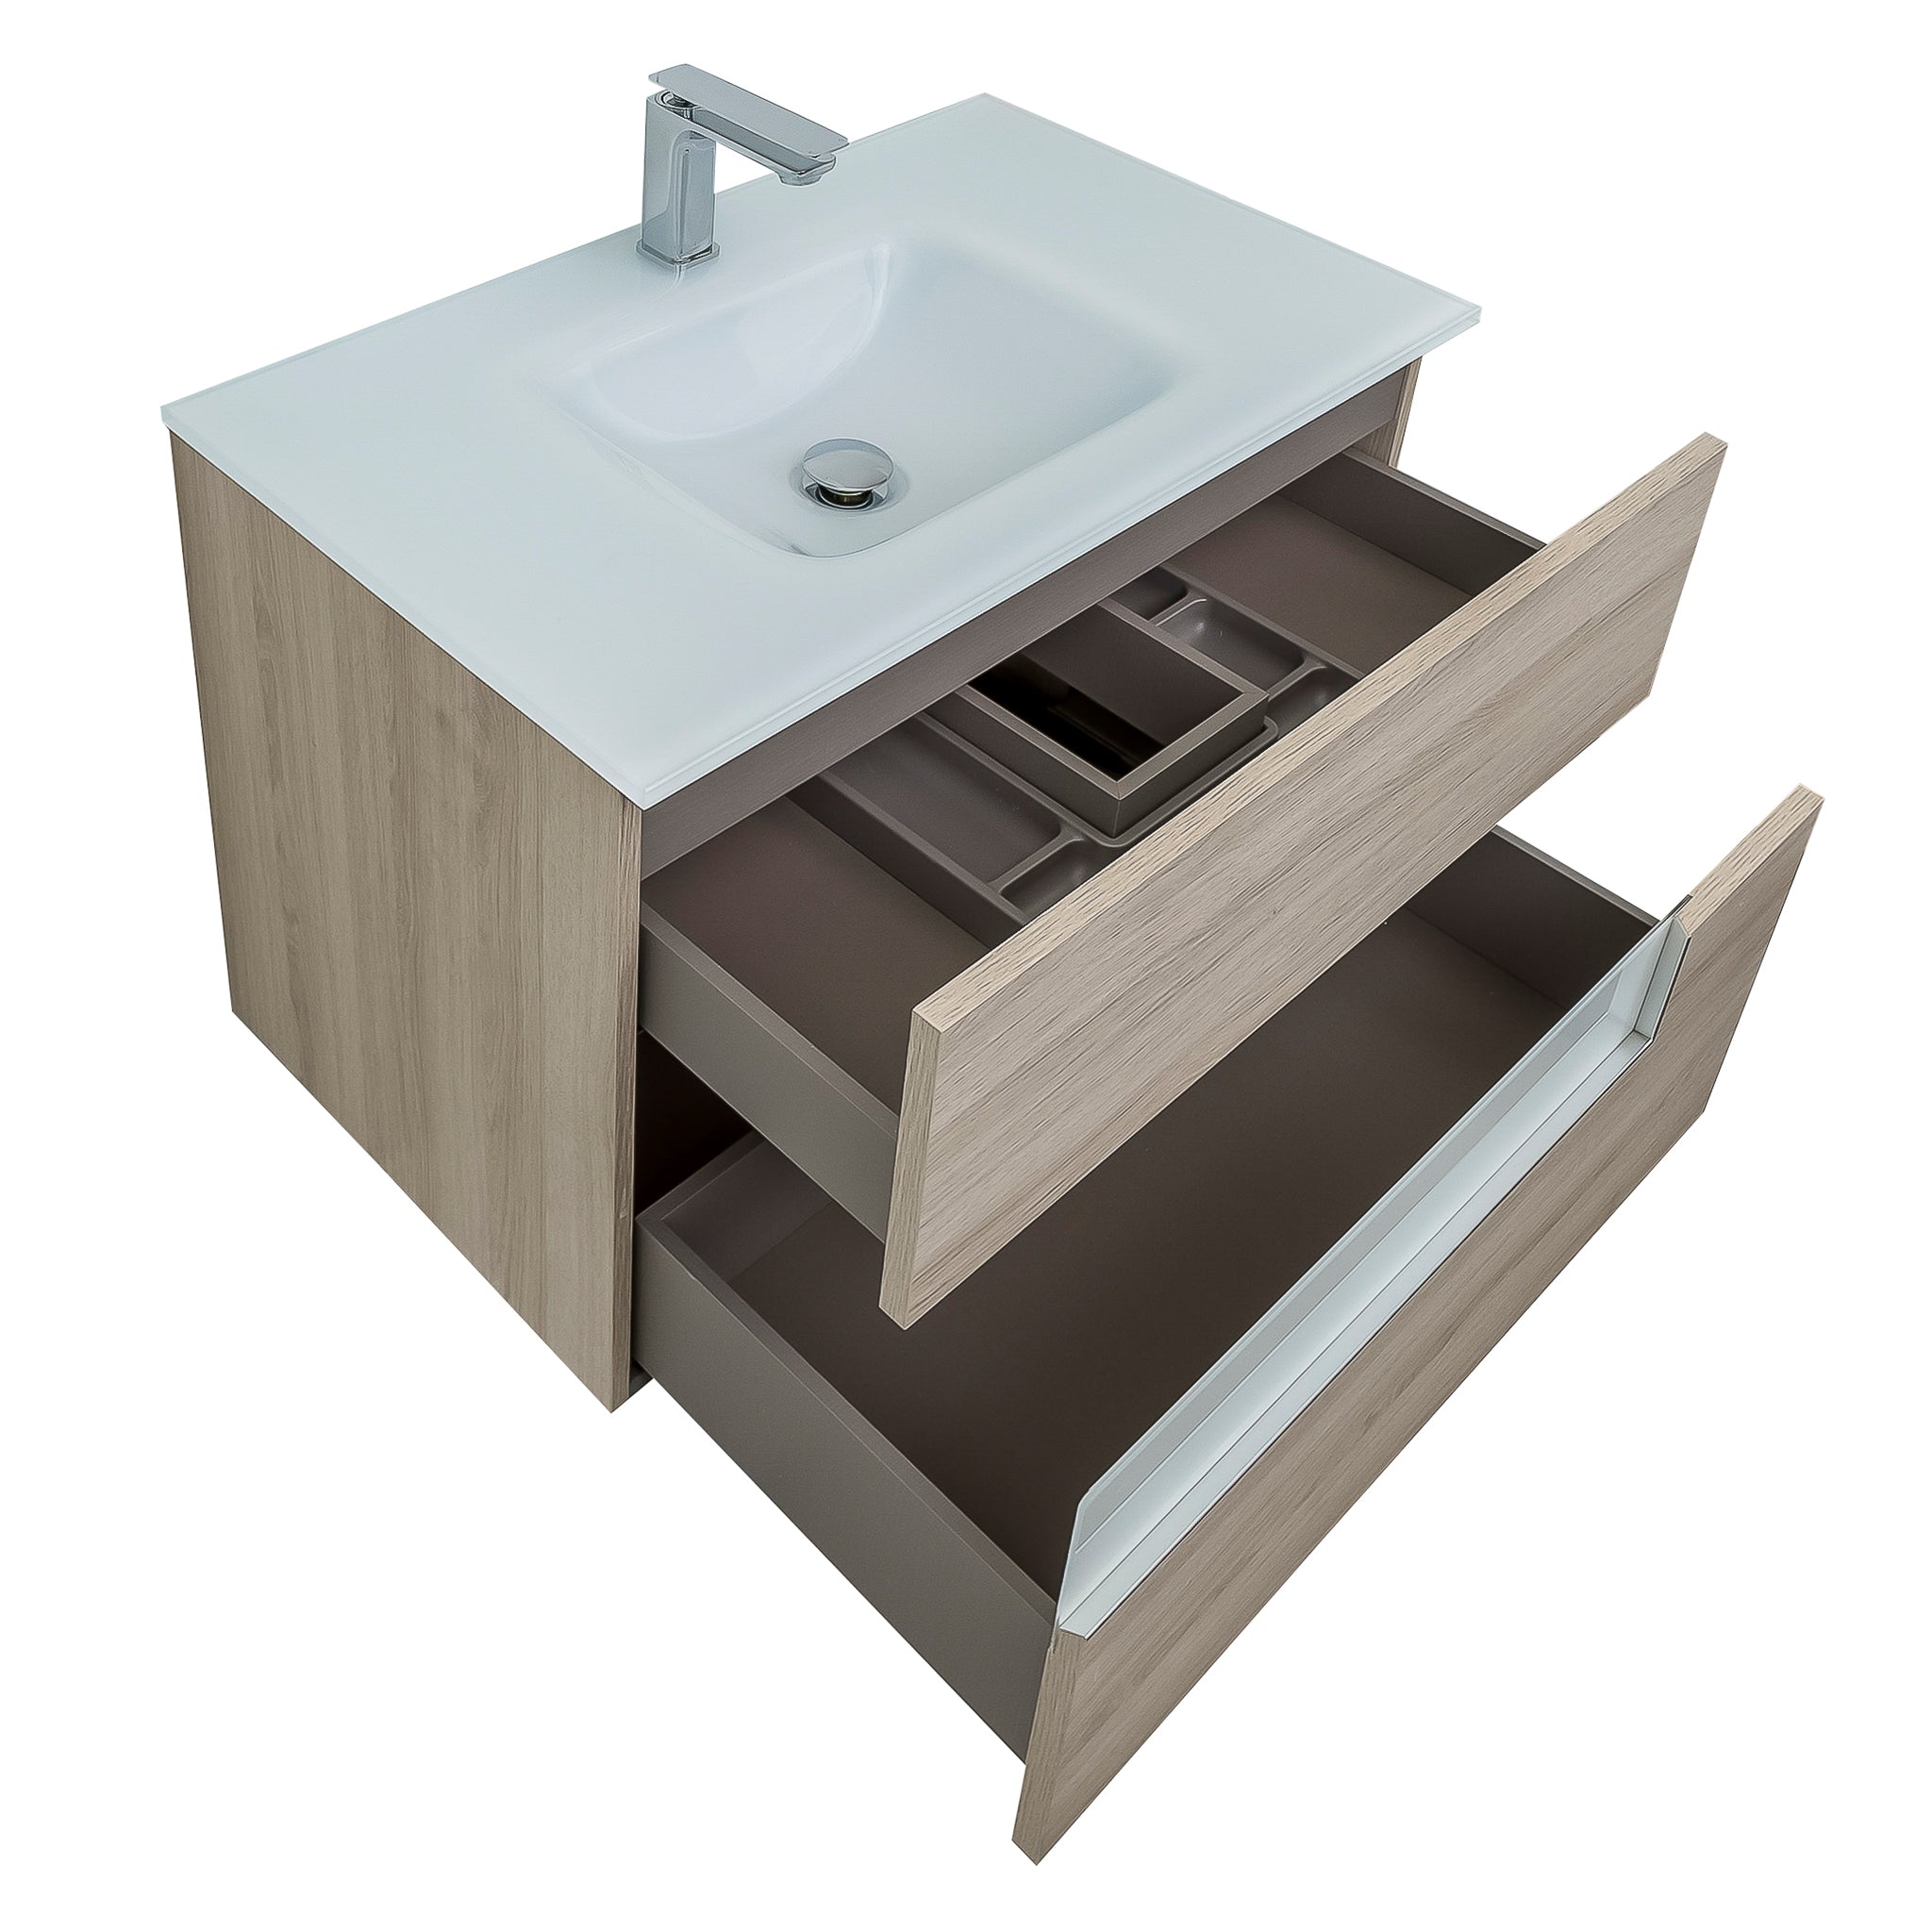 Vision 35.5 Natural Light Wood Cabinet, White Tempered Glass Sink, Wall Mounted Modern Vanity Set